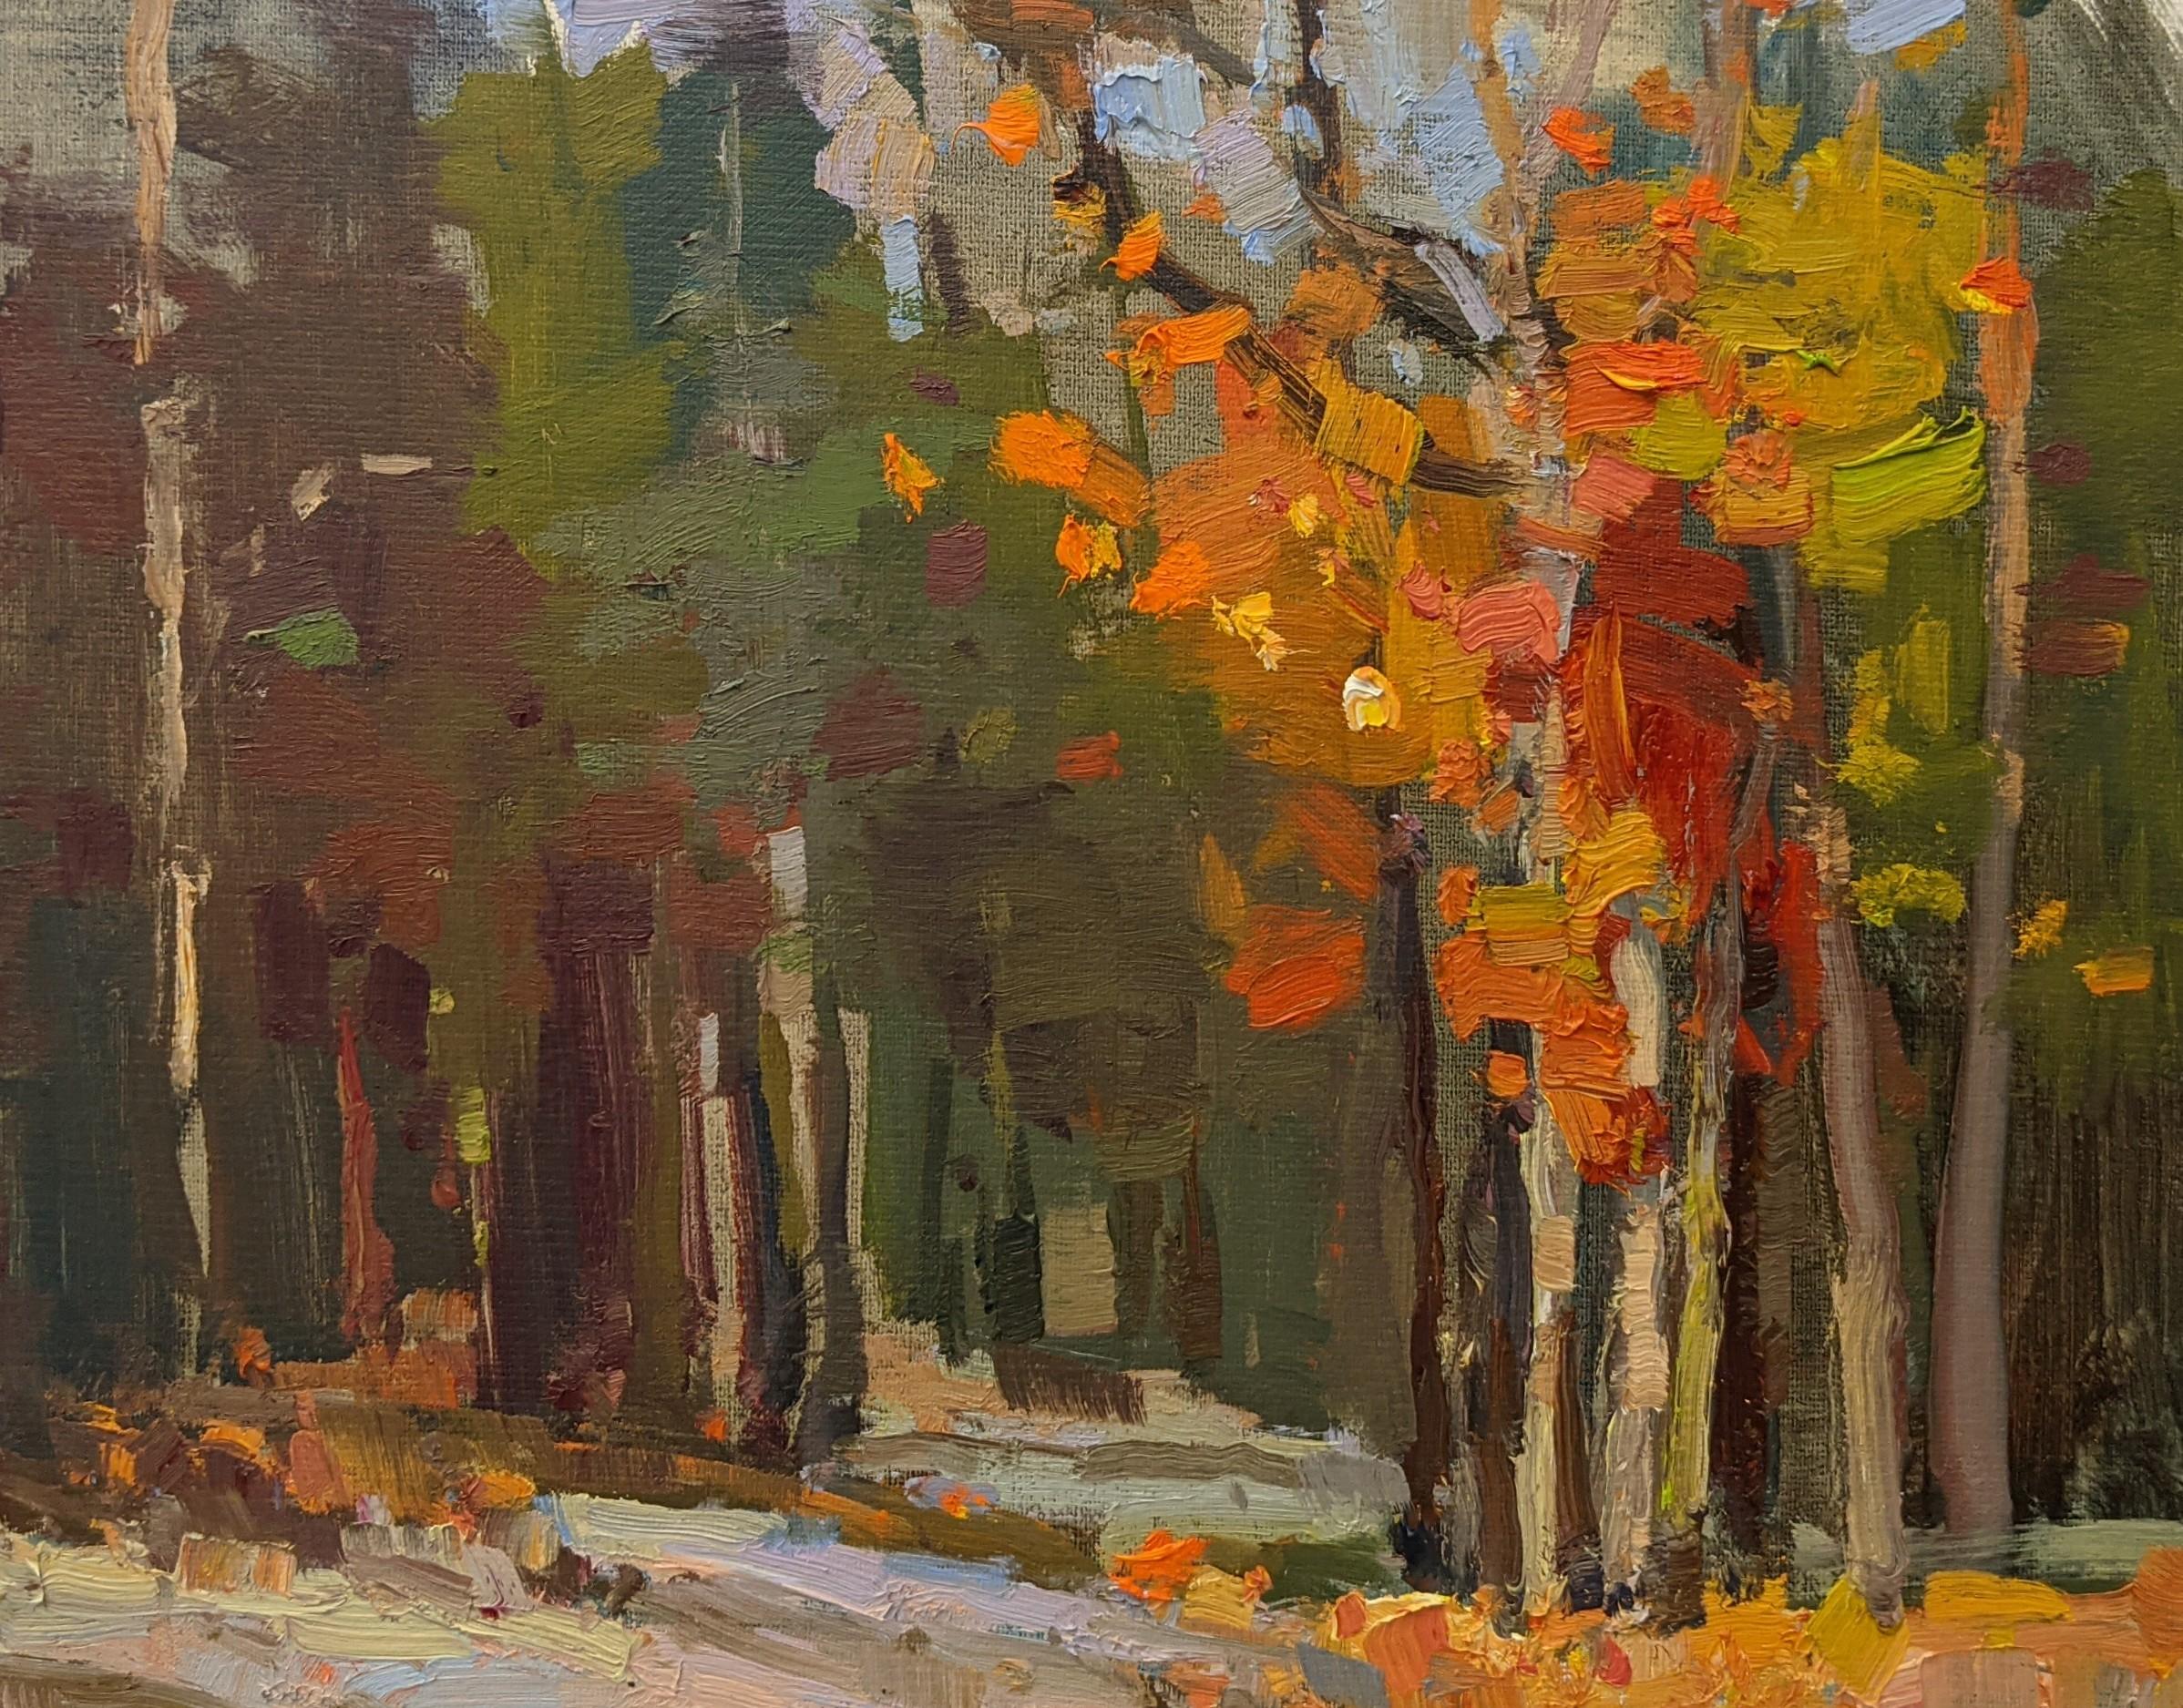 'Autumn Trail' is a framed Impressionist plein air landscape painting created by American artist Millie Gosch in 2021. Featuring a rich palette mostly made of blue, green, red and orange tones, this oil on canvas painting depicts an exquisite